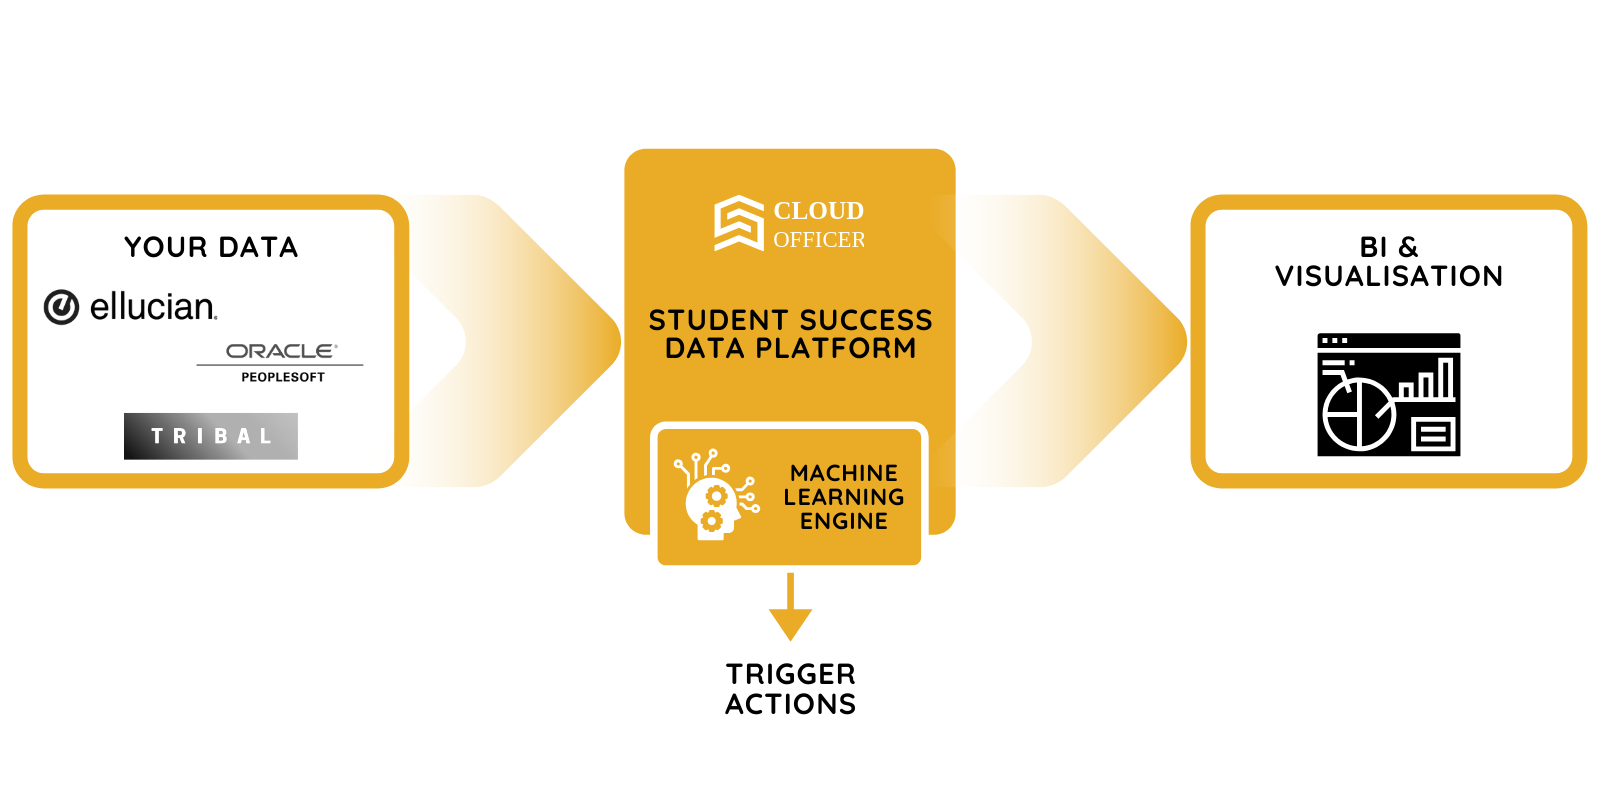 diagram of the cloud officer student success data platform for student retention